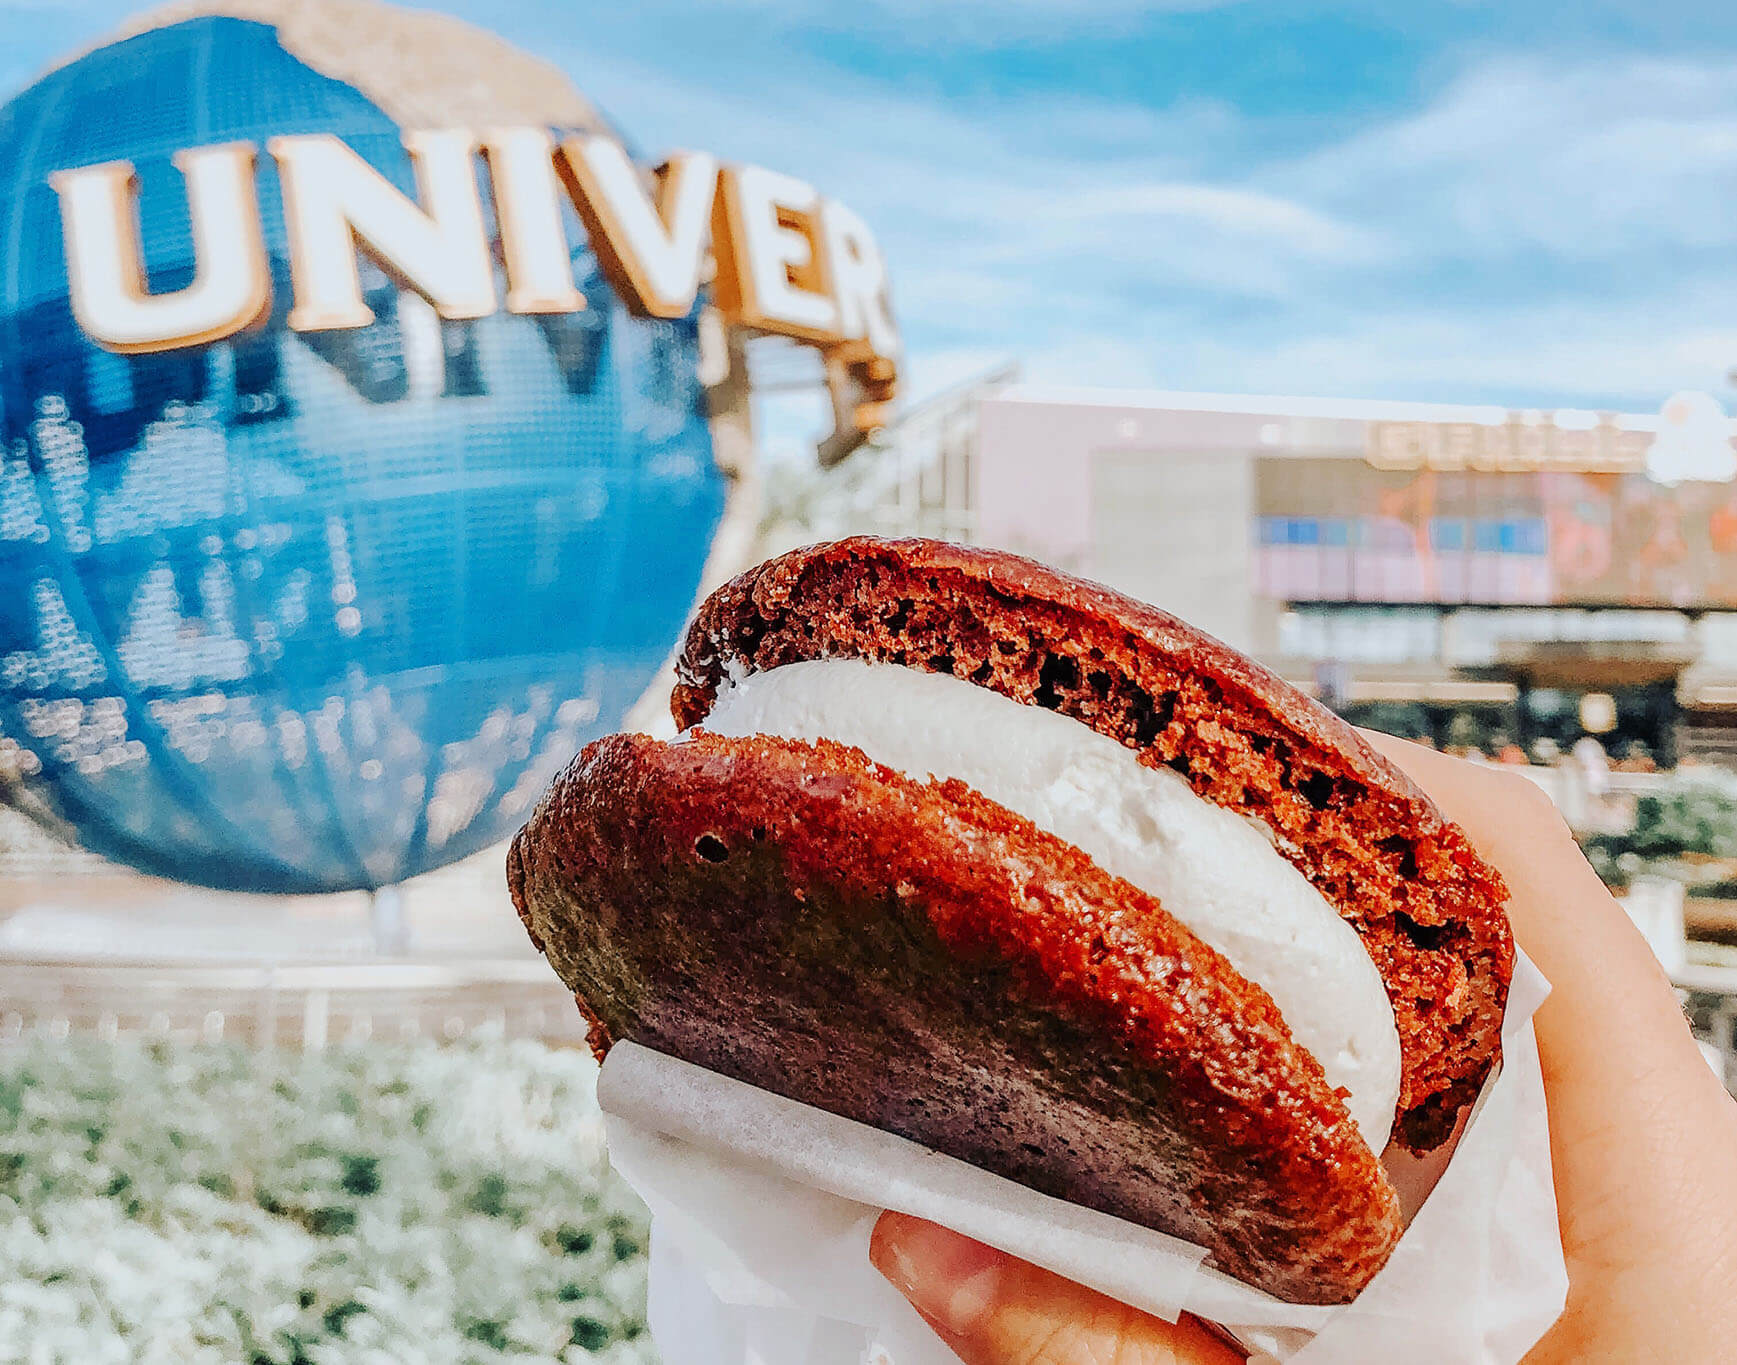 Giant chocolate and red velvet whoopie pie from Studio Sweets in Universal Studios Orlando